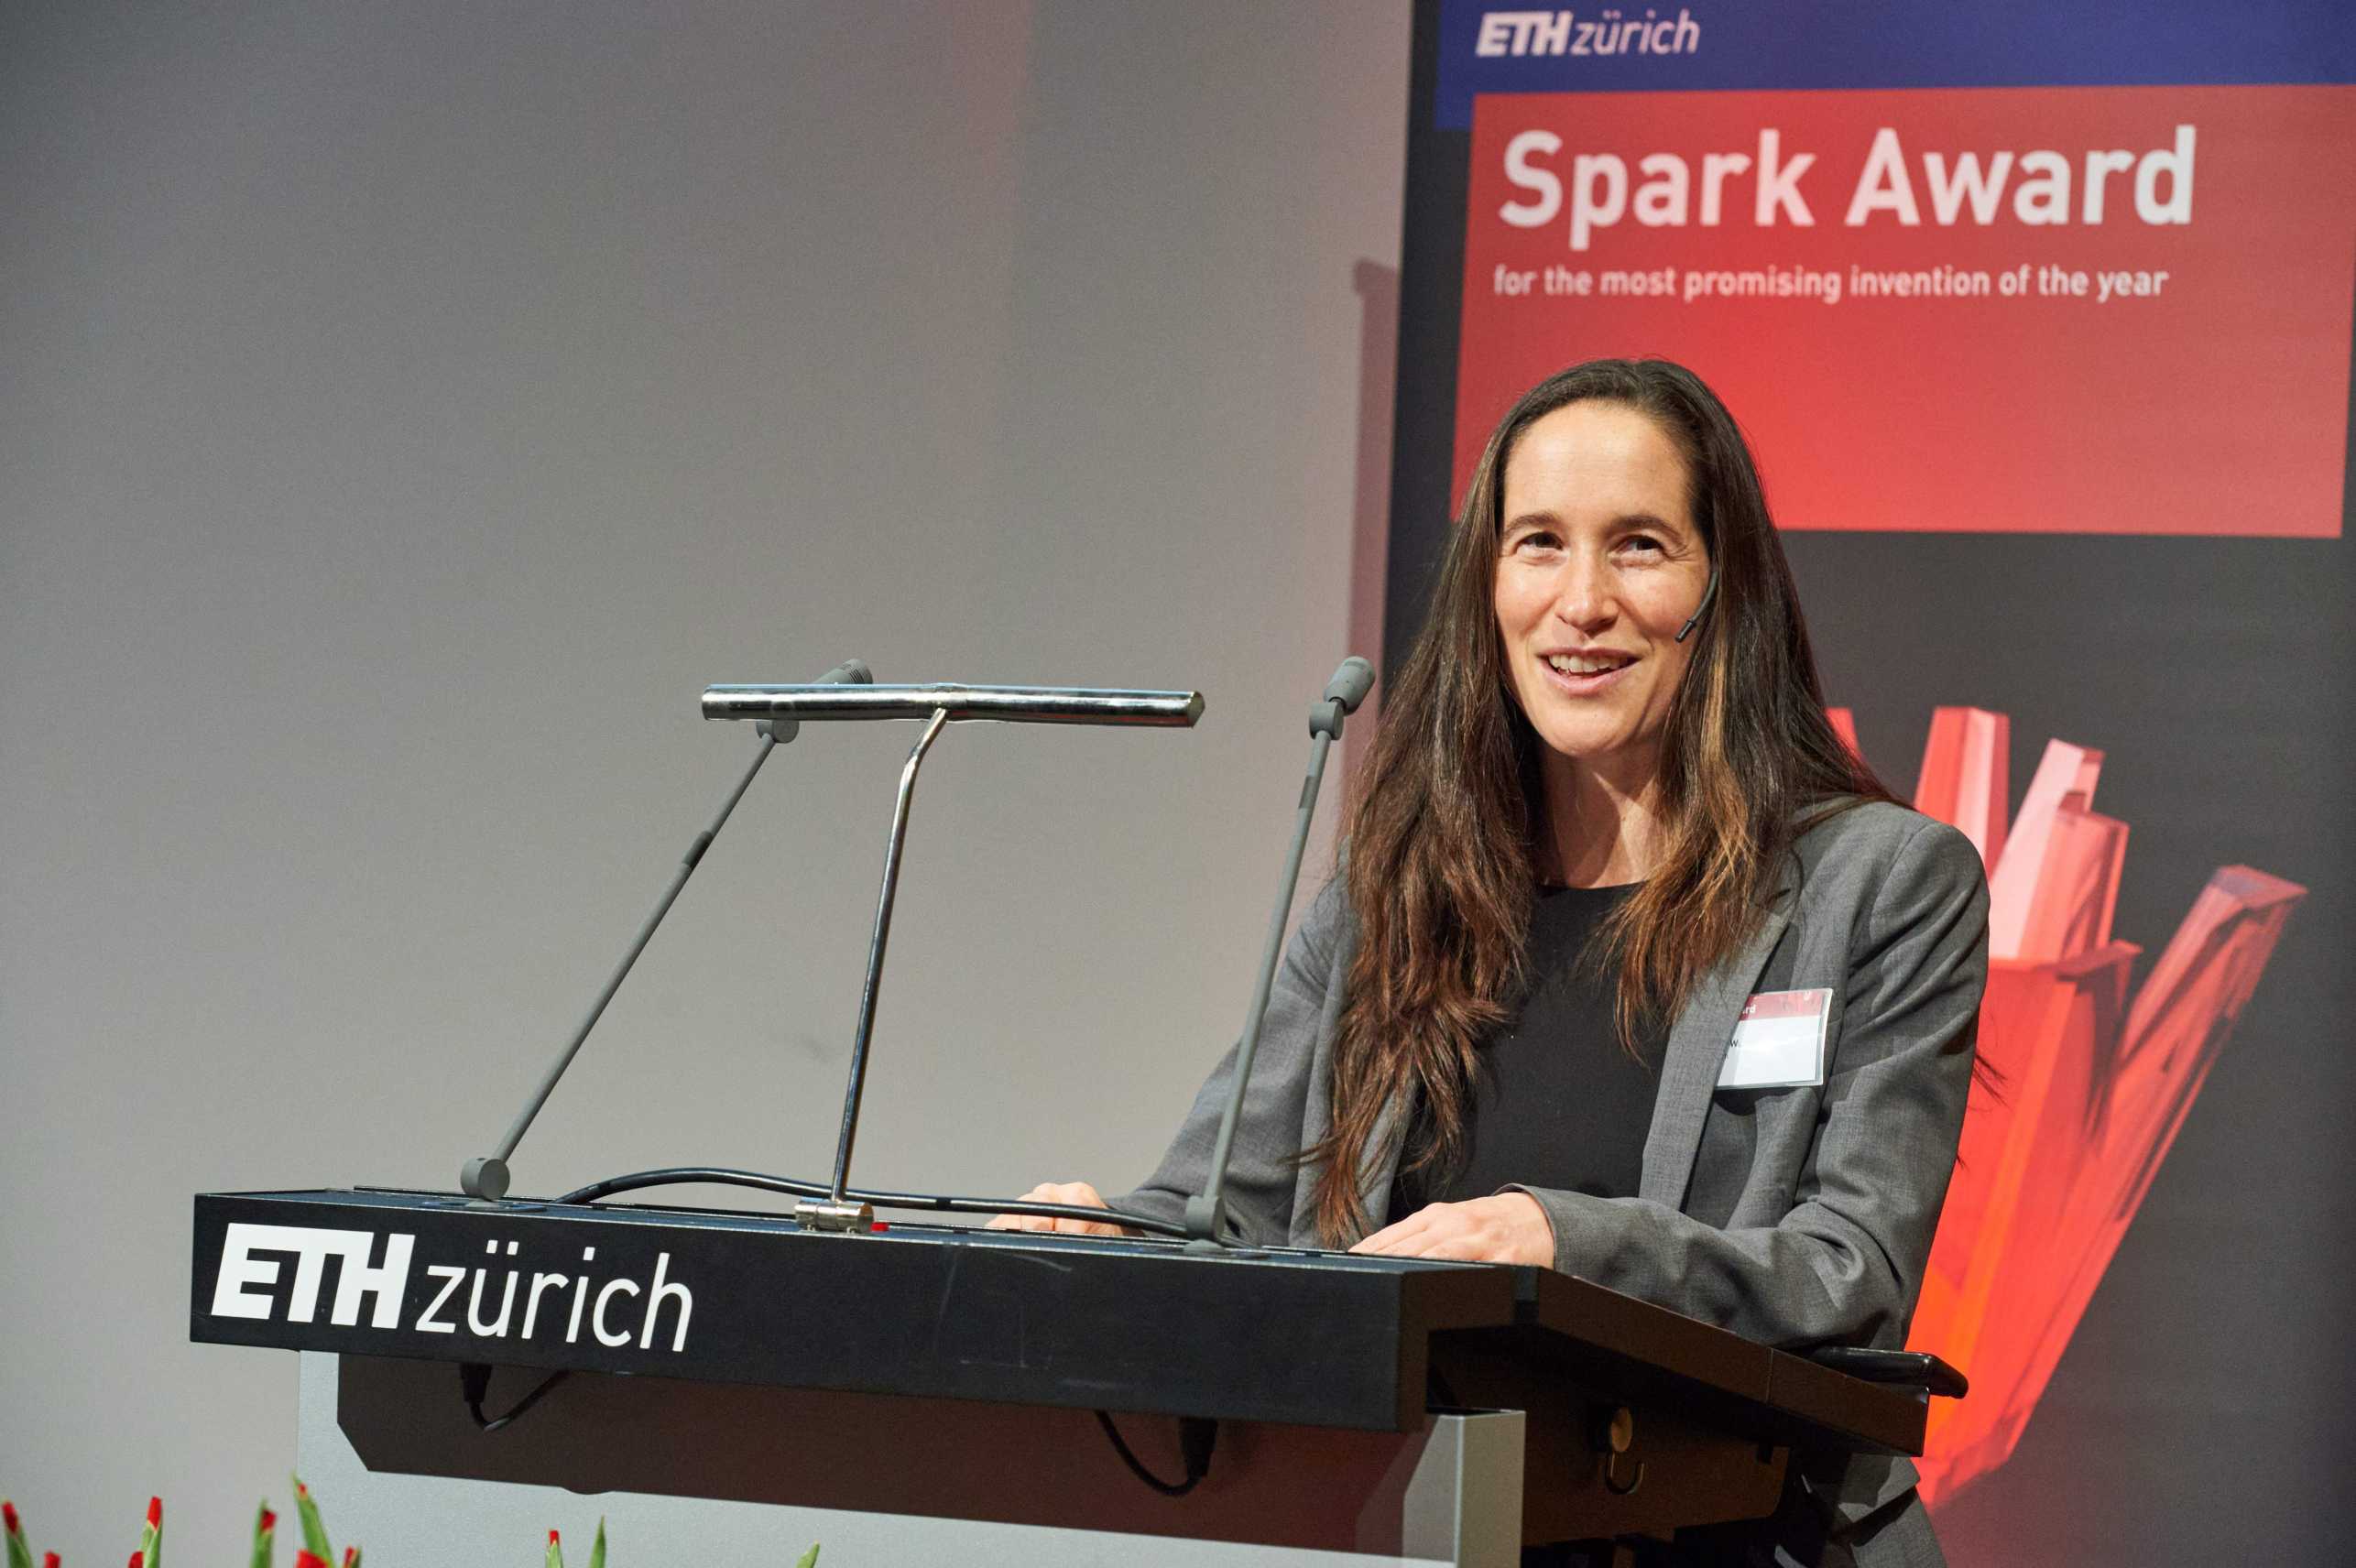 Vanessa Wood at the lectern at ETH Zurich during the Spark Award ceremony.